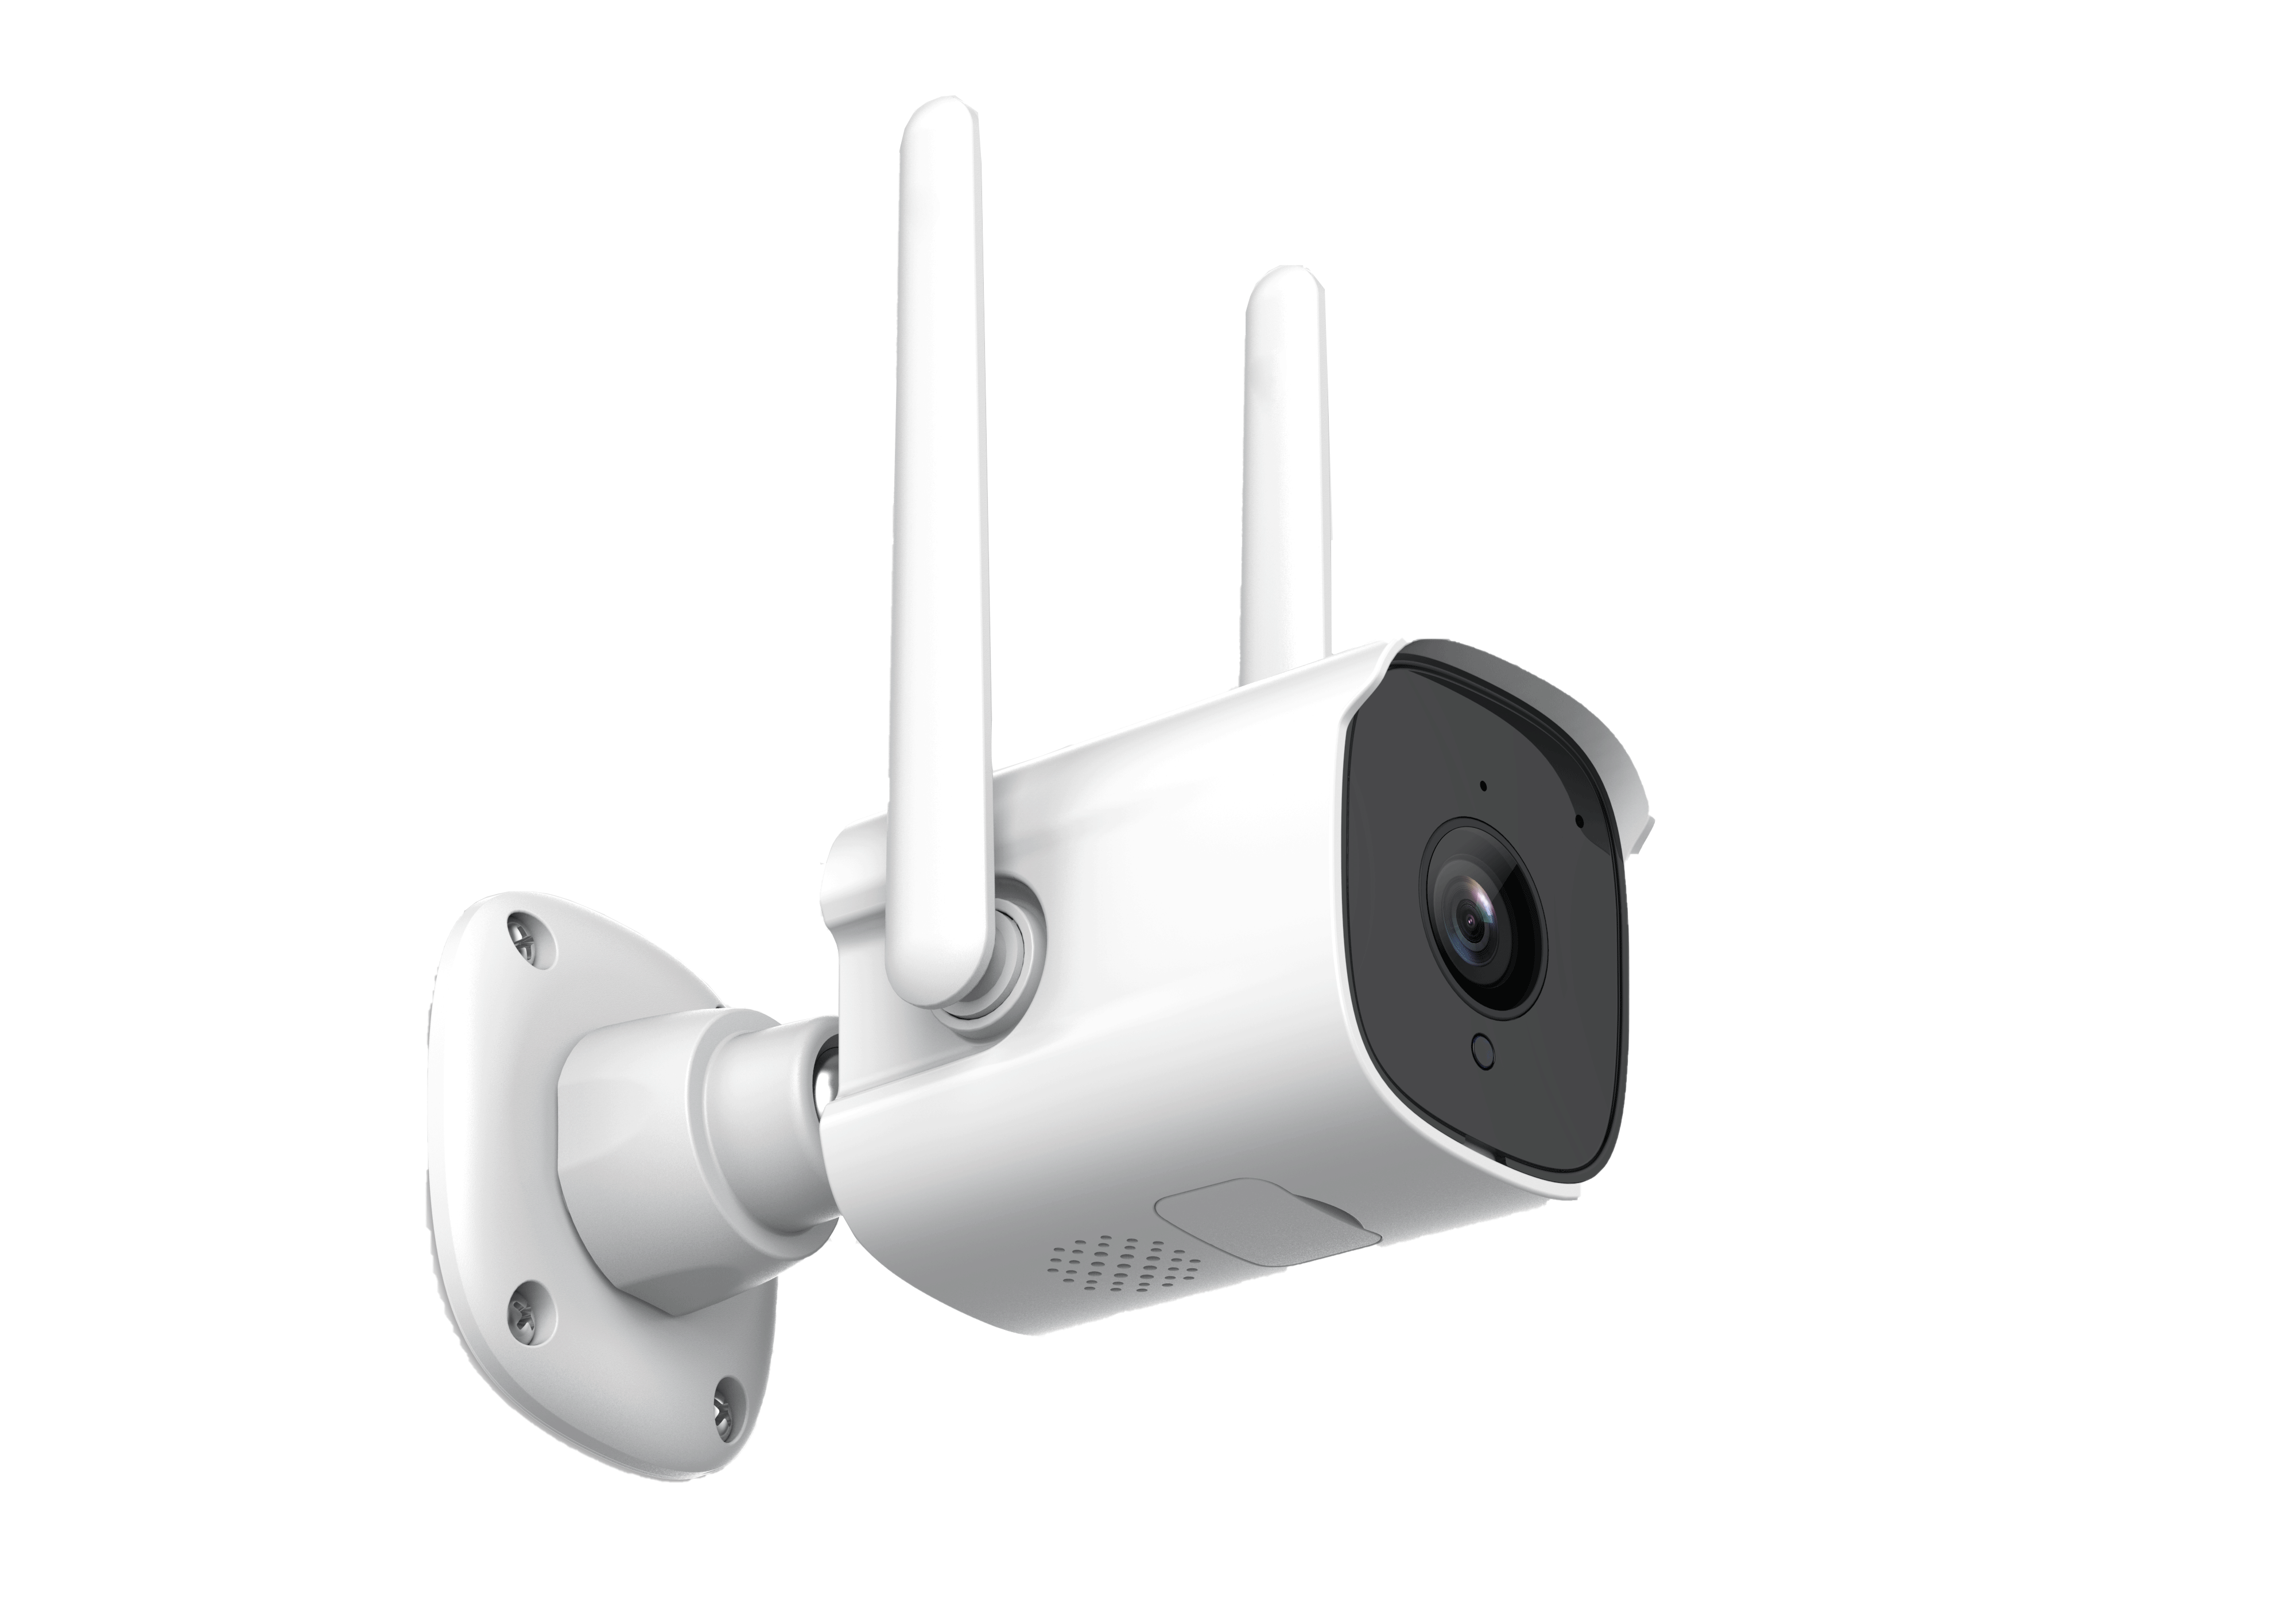 Network camera function